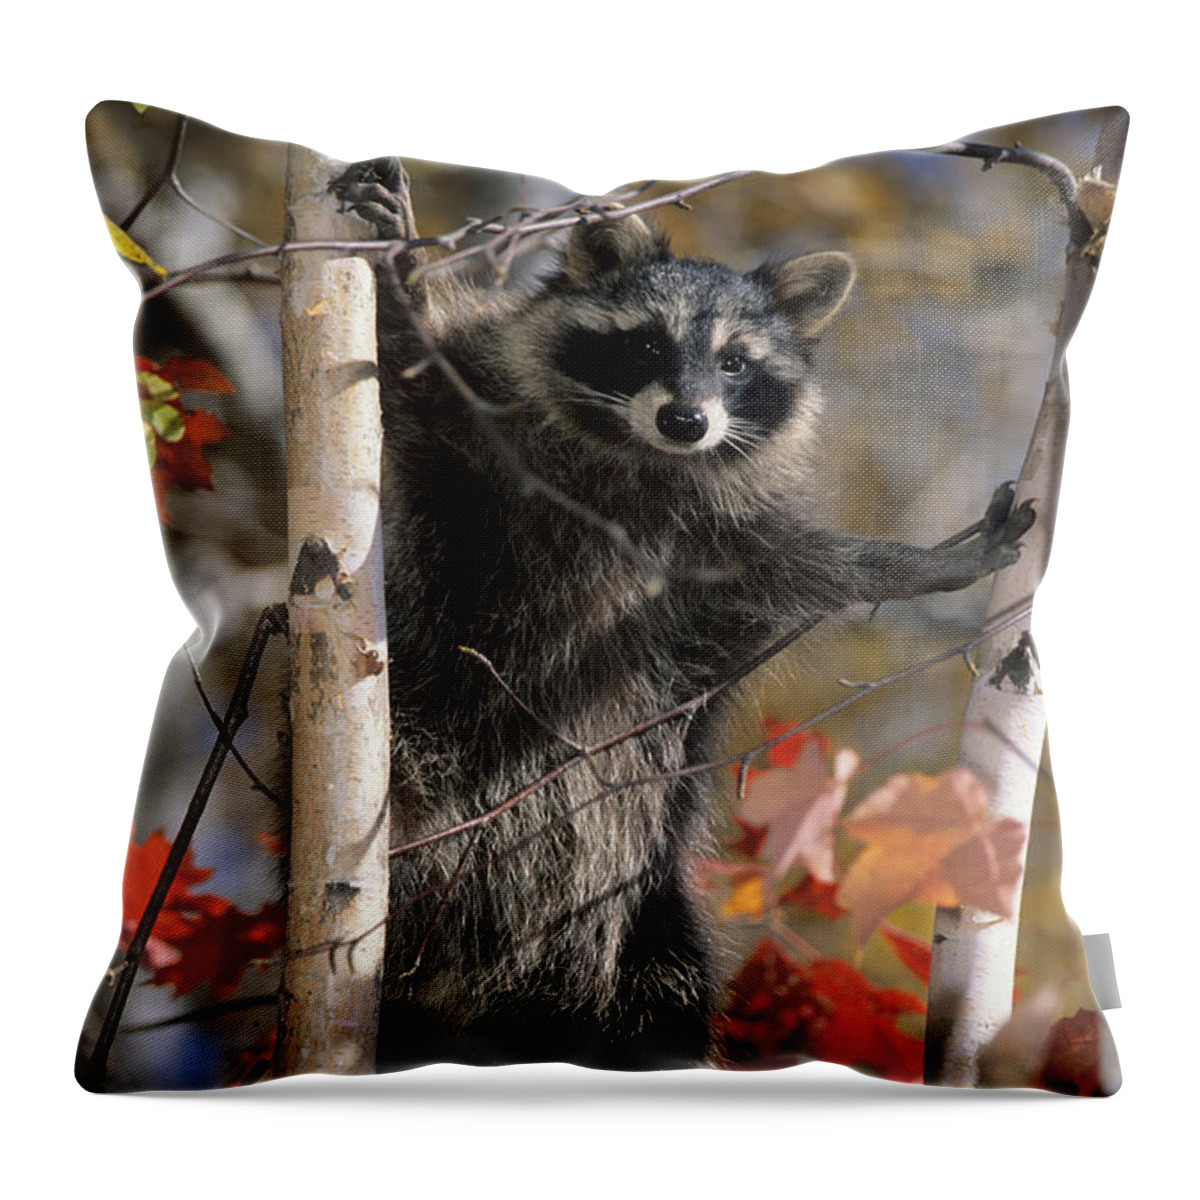 Racoon Throw Pillow featuring the photograph Racoon in Tree by Chris Scroggins